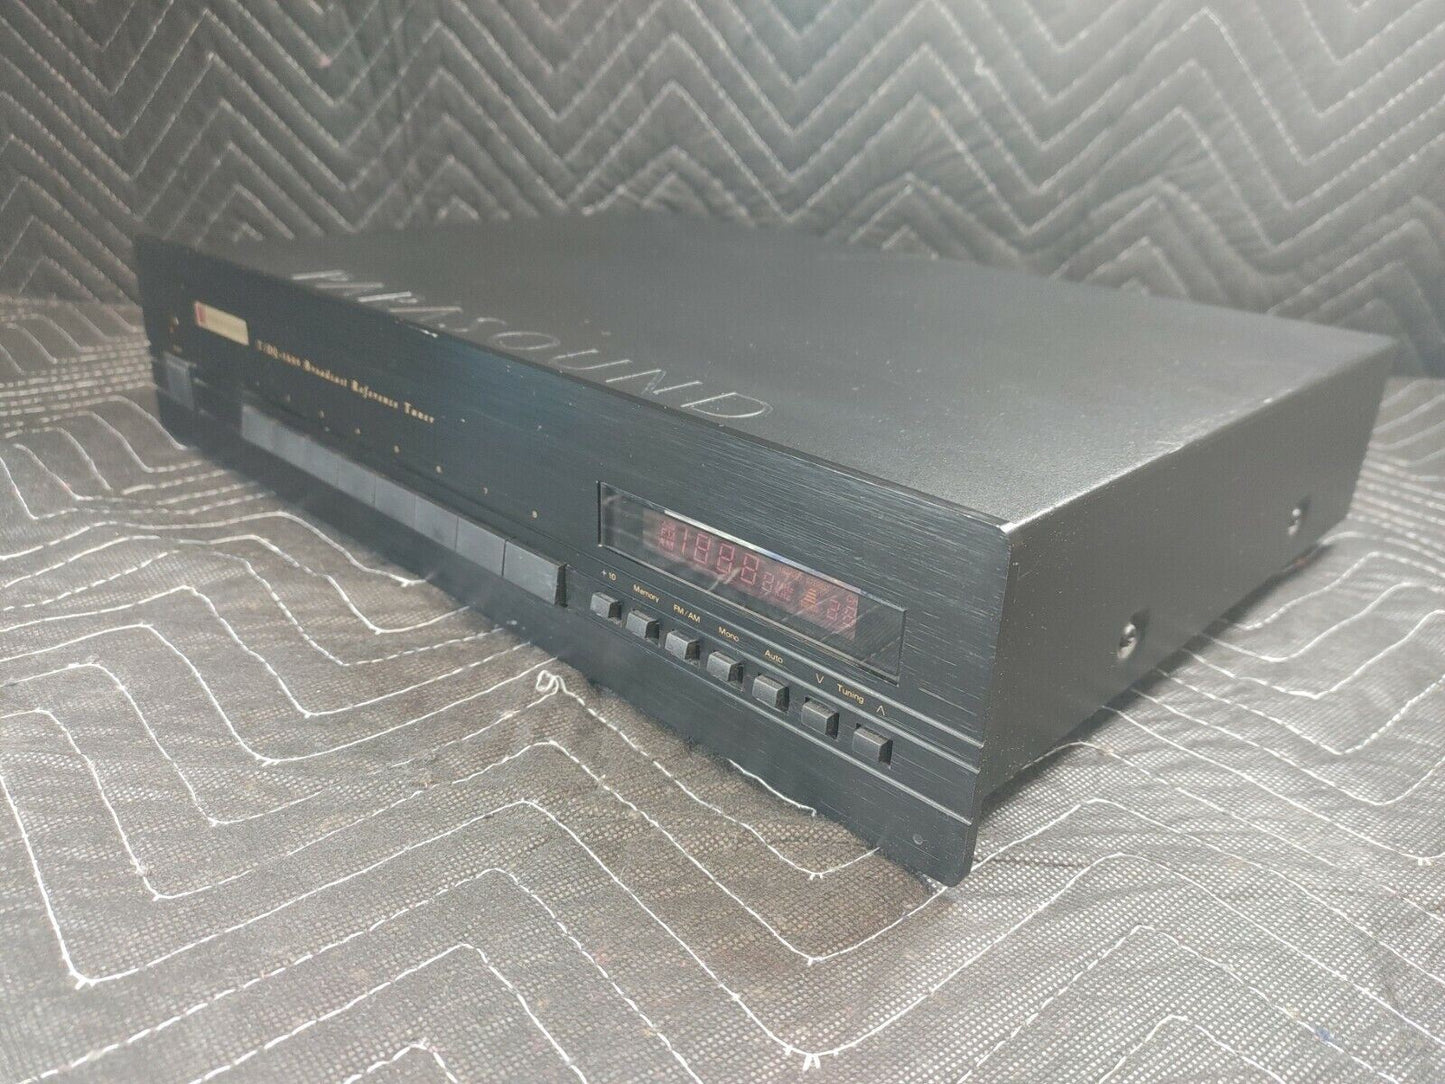 Parasound T/DQ-1600 Broadcast Reference AM/FM Tuner (Partially Working)